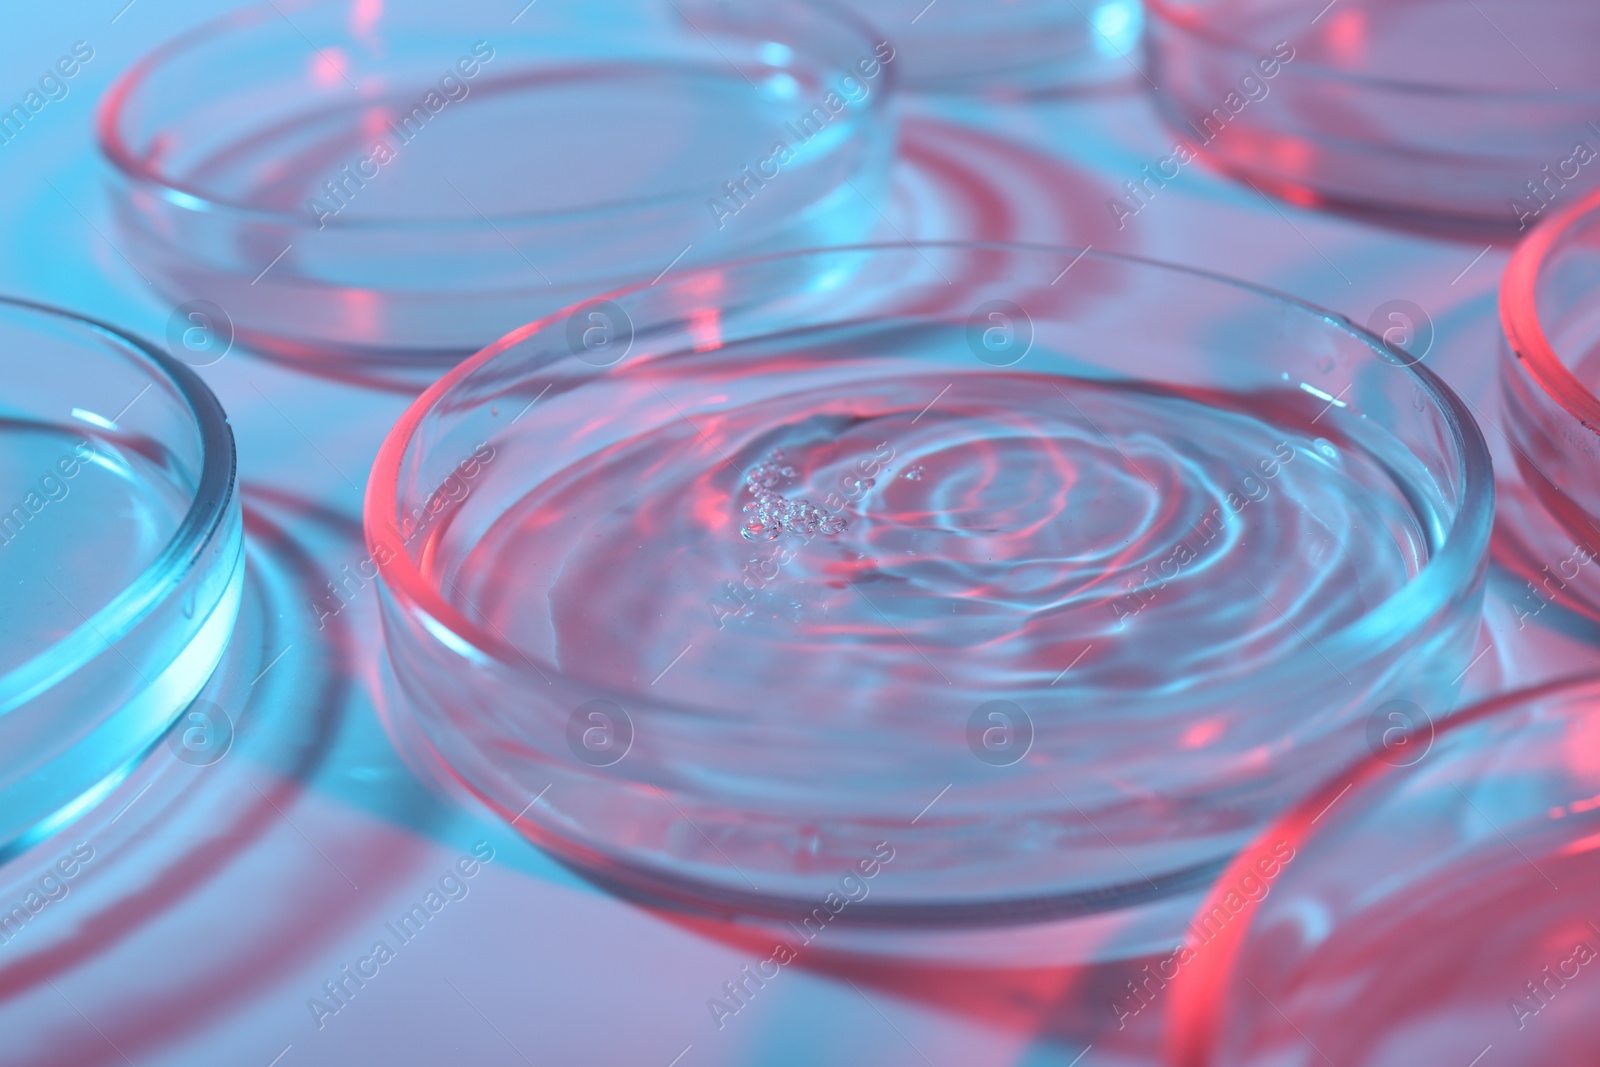 Photo of Petri dishes with liquid samples on light blue background, closeup